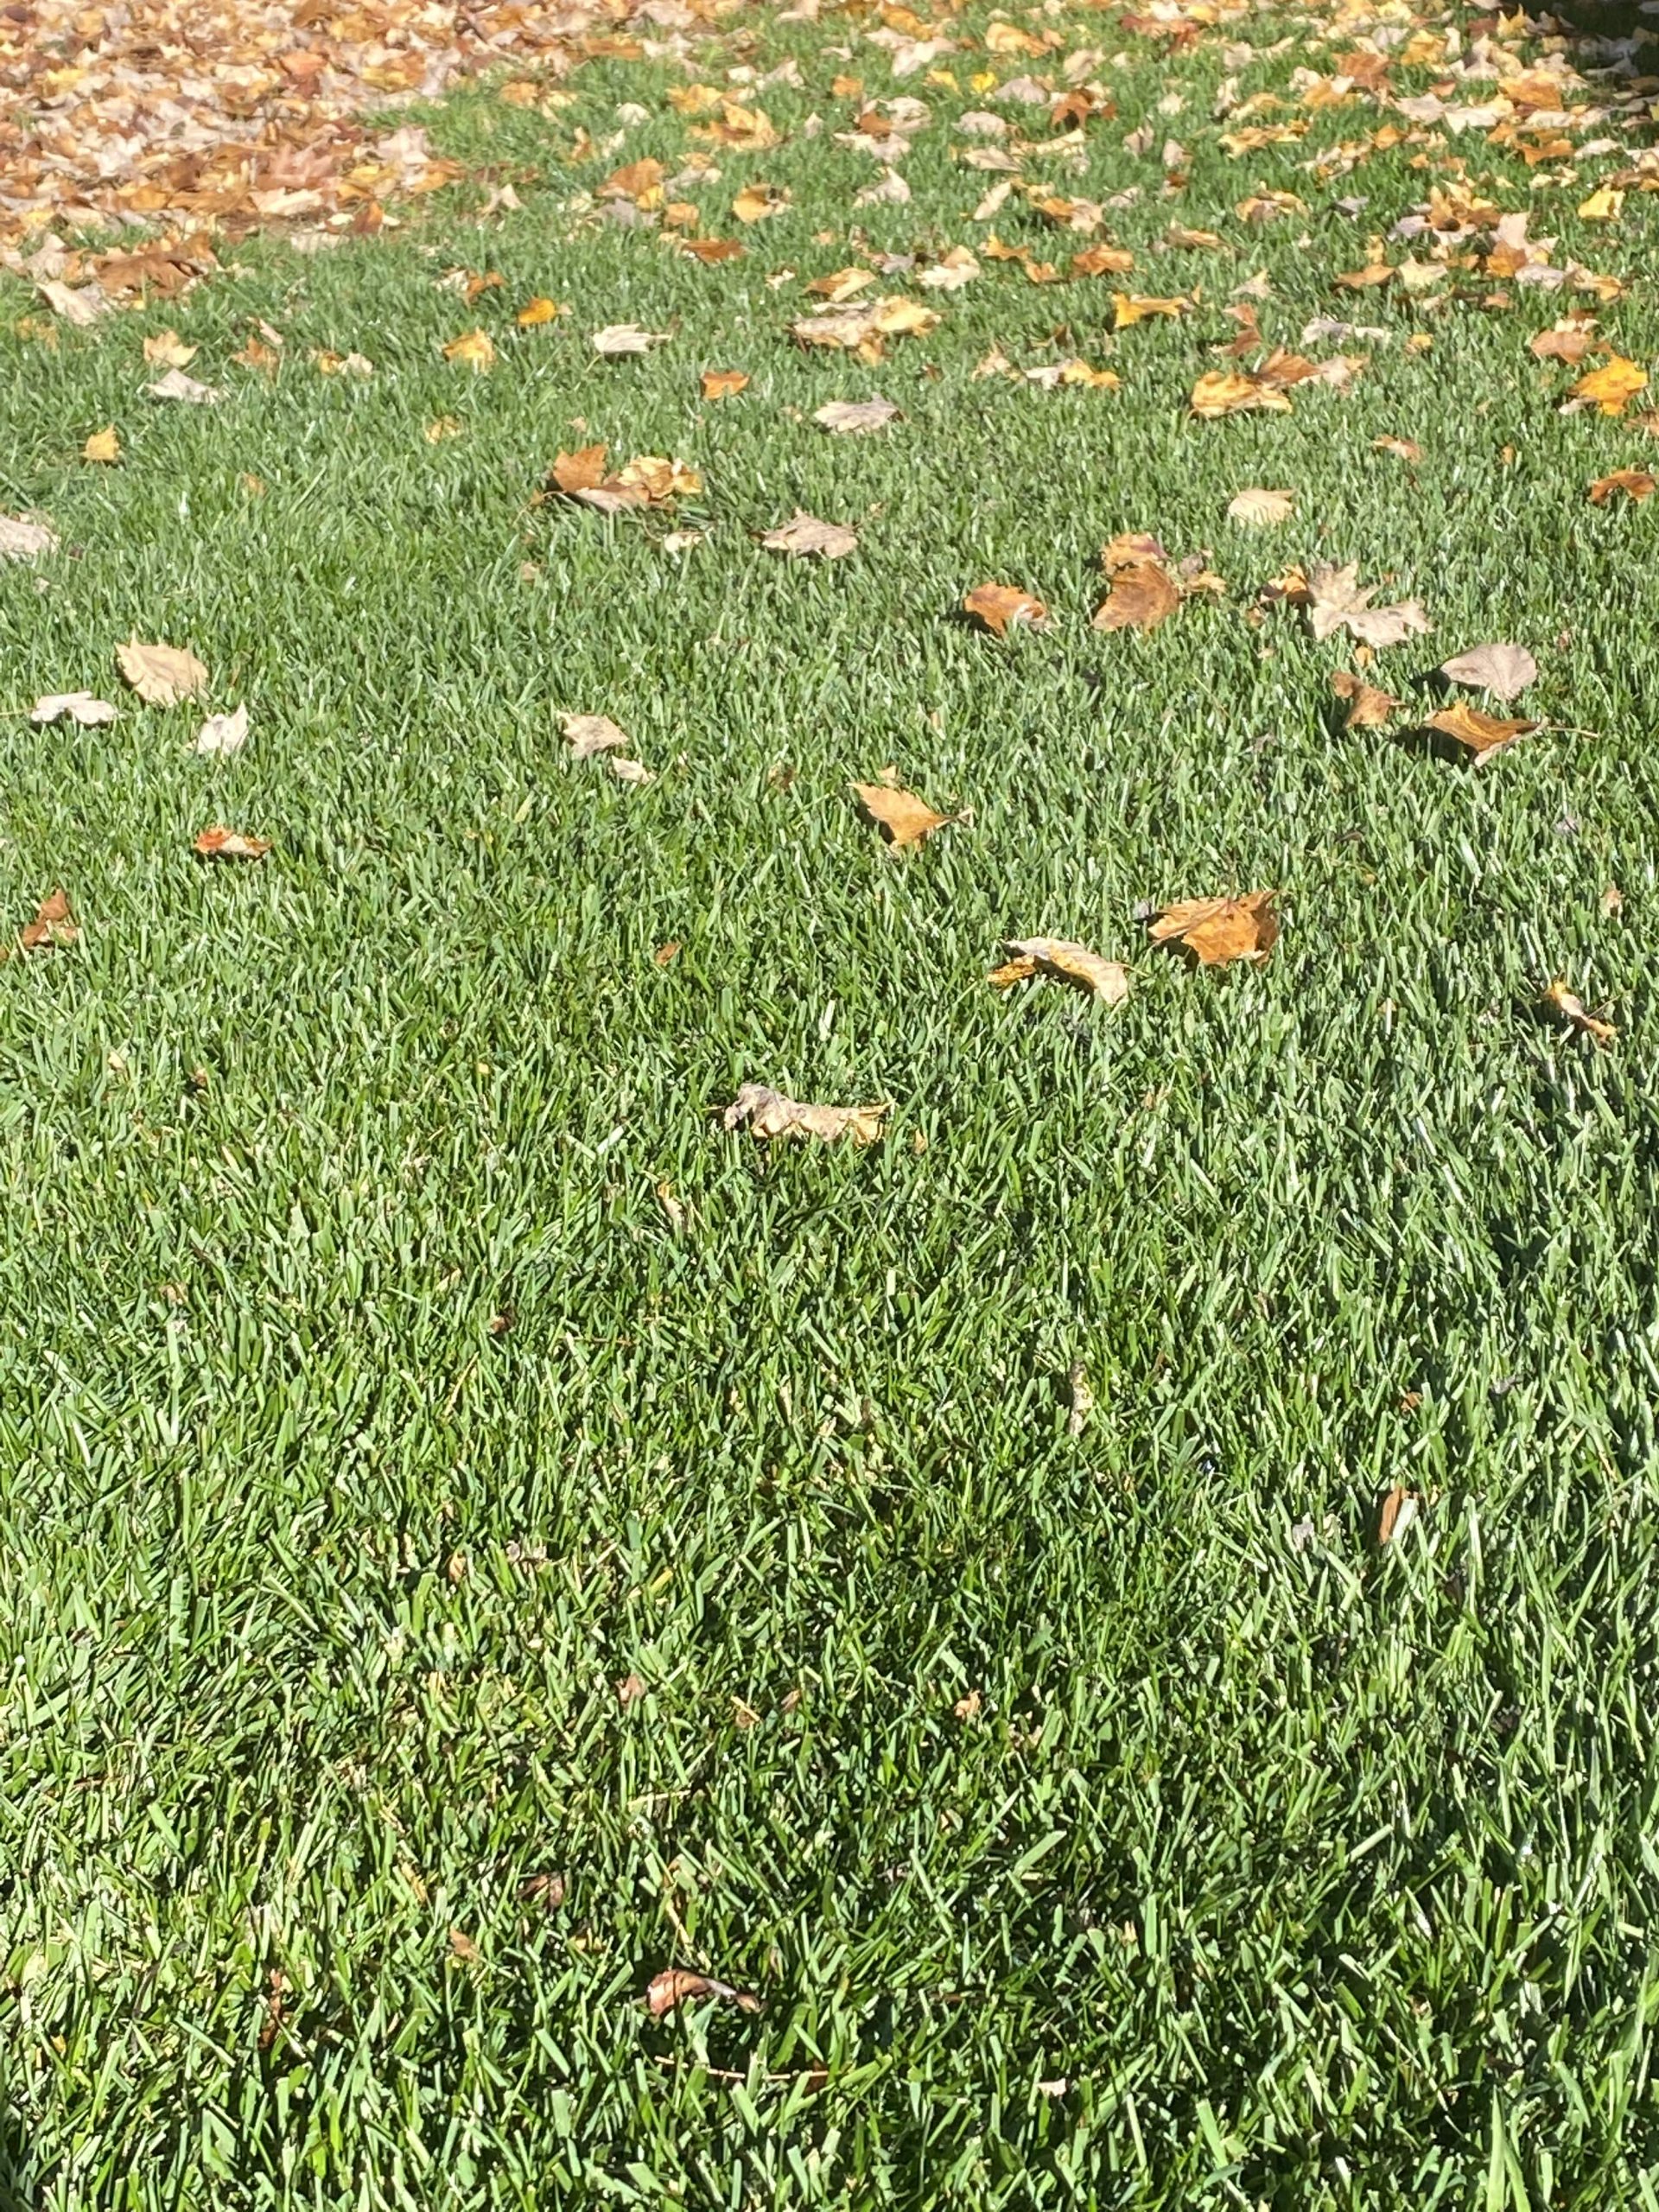 Fall_Leaves_on_Lawn(1)